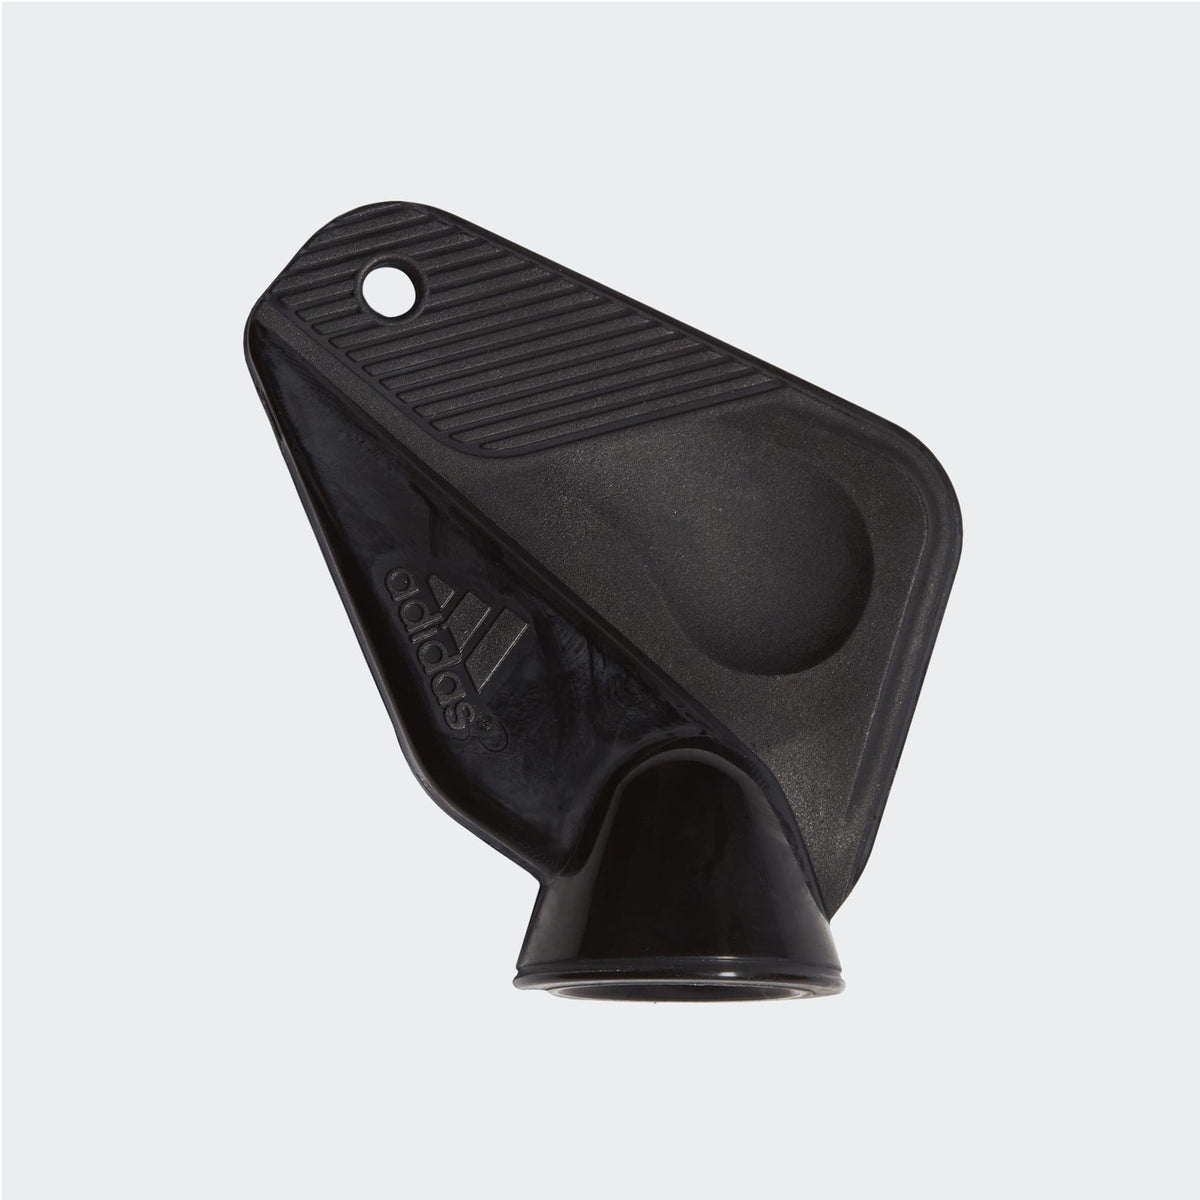 S/Accs Adidas Stud Wrench